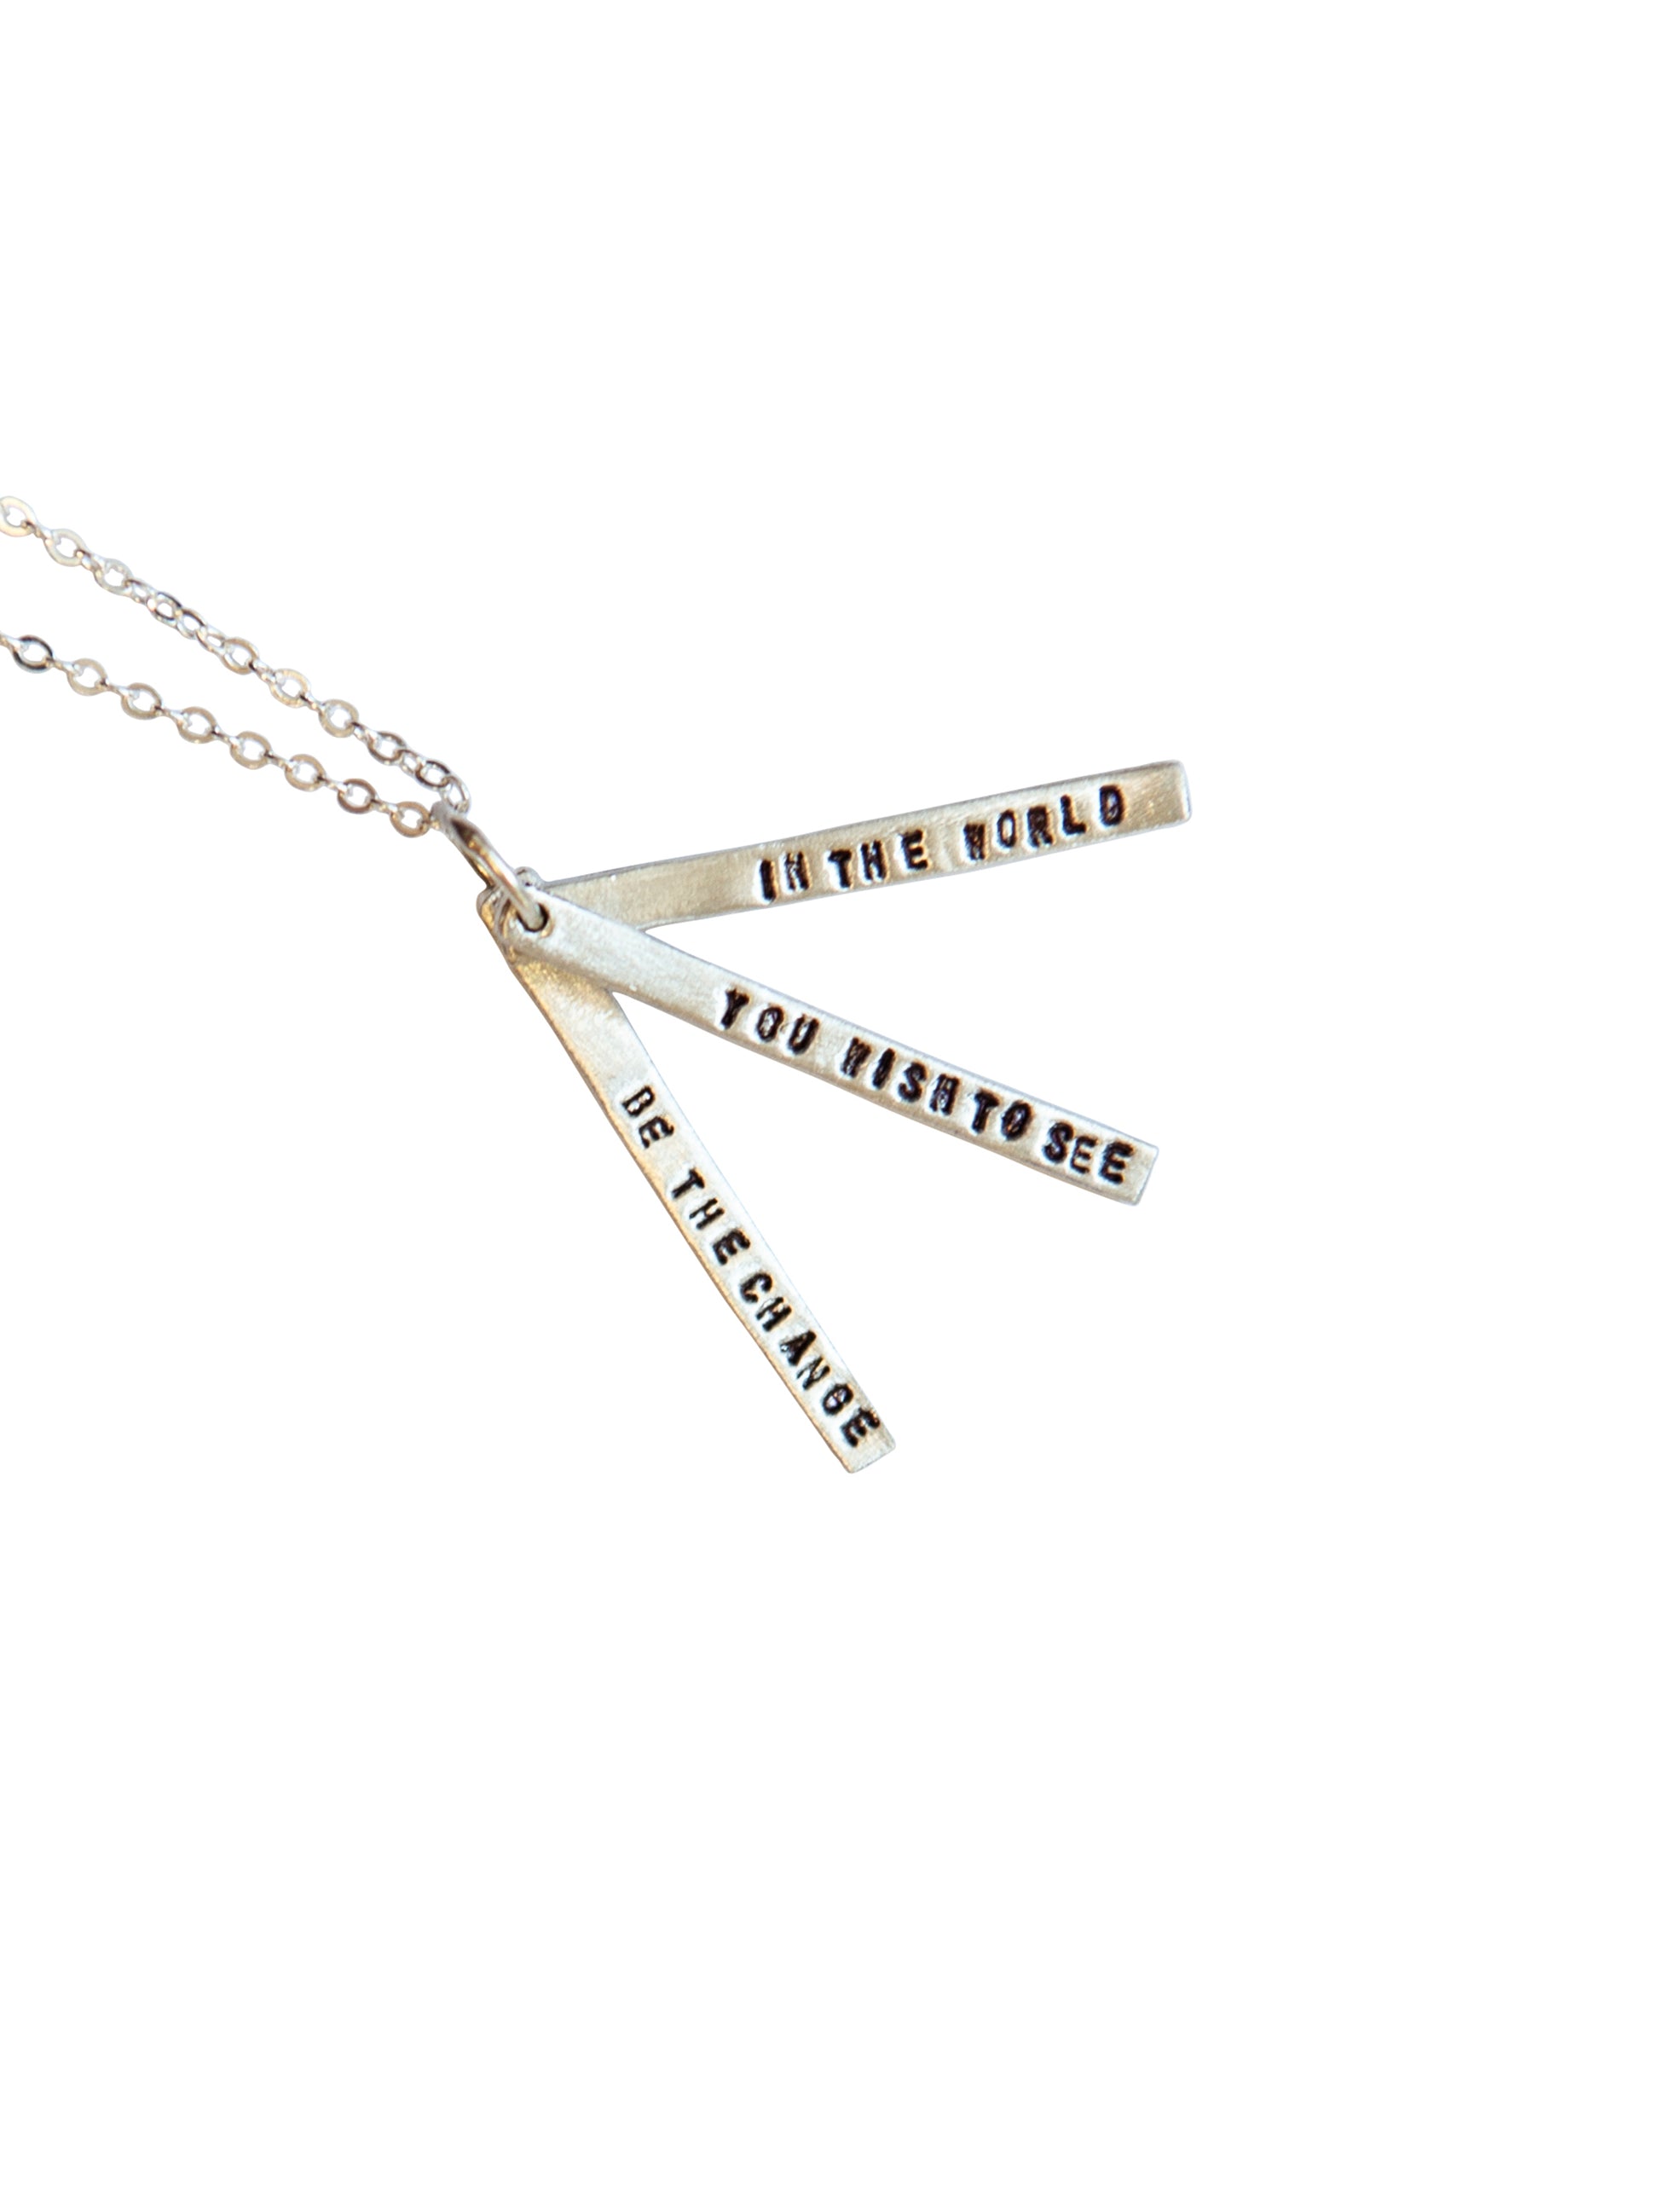 Chocolate & Steel Long-Bar Quote Necklace Gandhi Weston Table